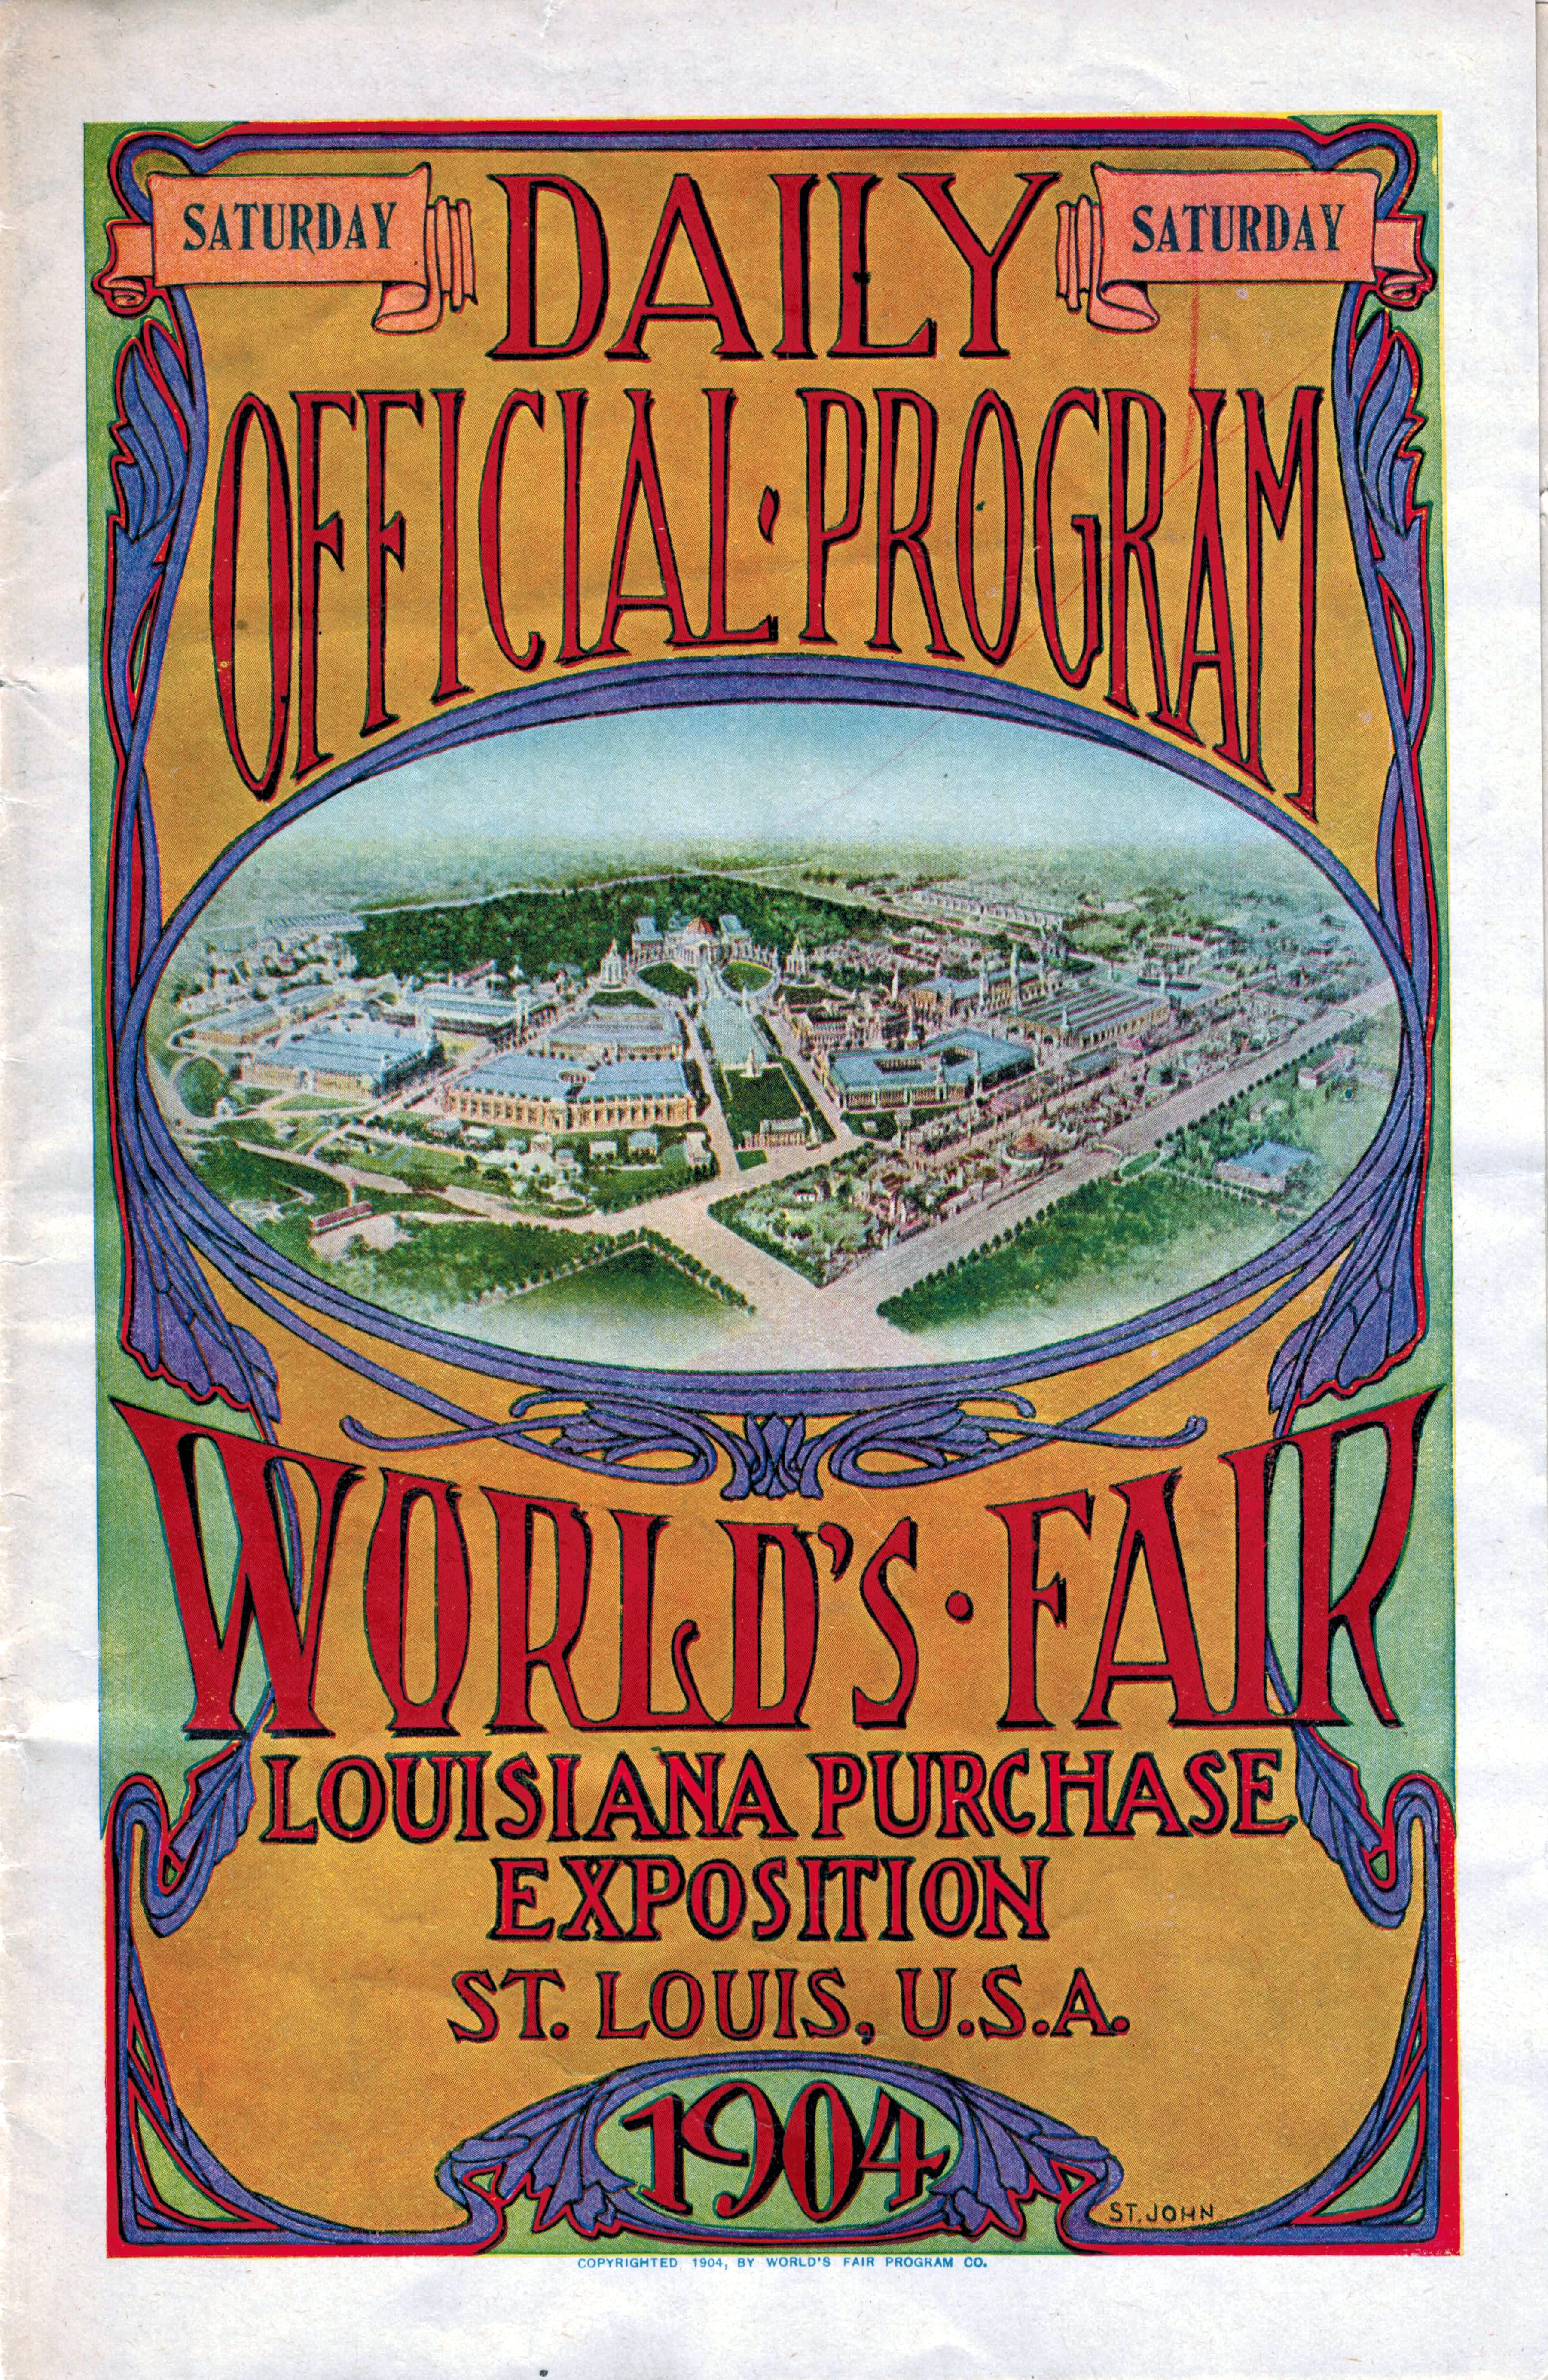 An Official Daily Program from the 1904 Louisiana Purchase Exposition for Saturday, October 8th ...